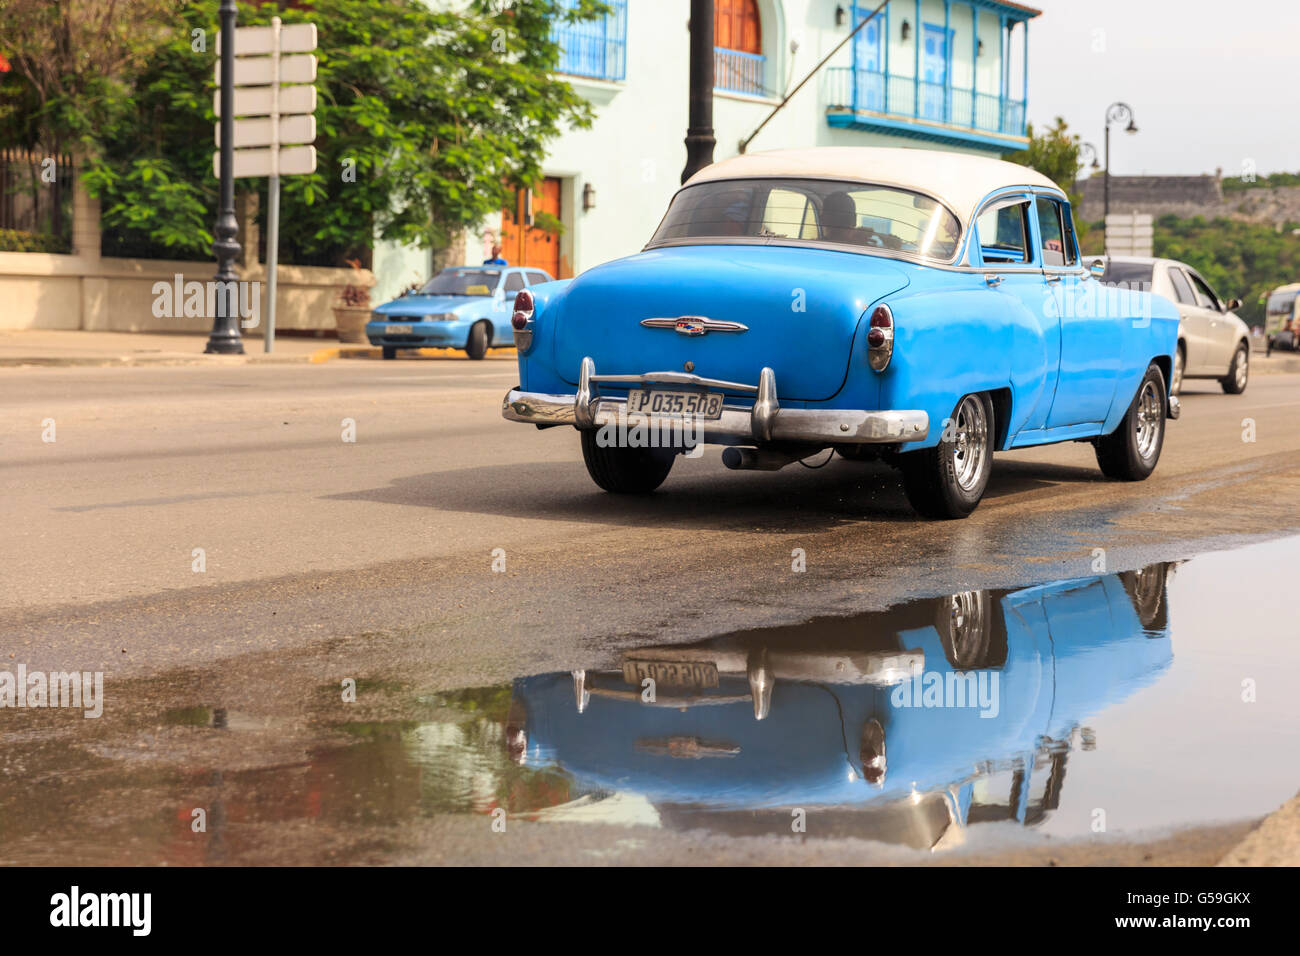 1950s blue Chevrolet American classic car driving,and reflection in a puddle, Havana,Cuba Stock Photo